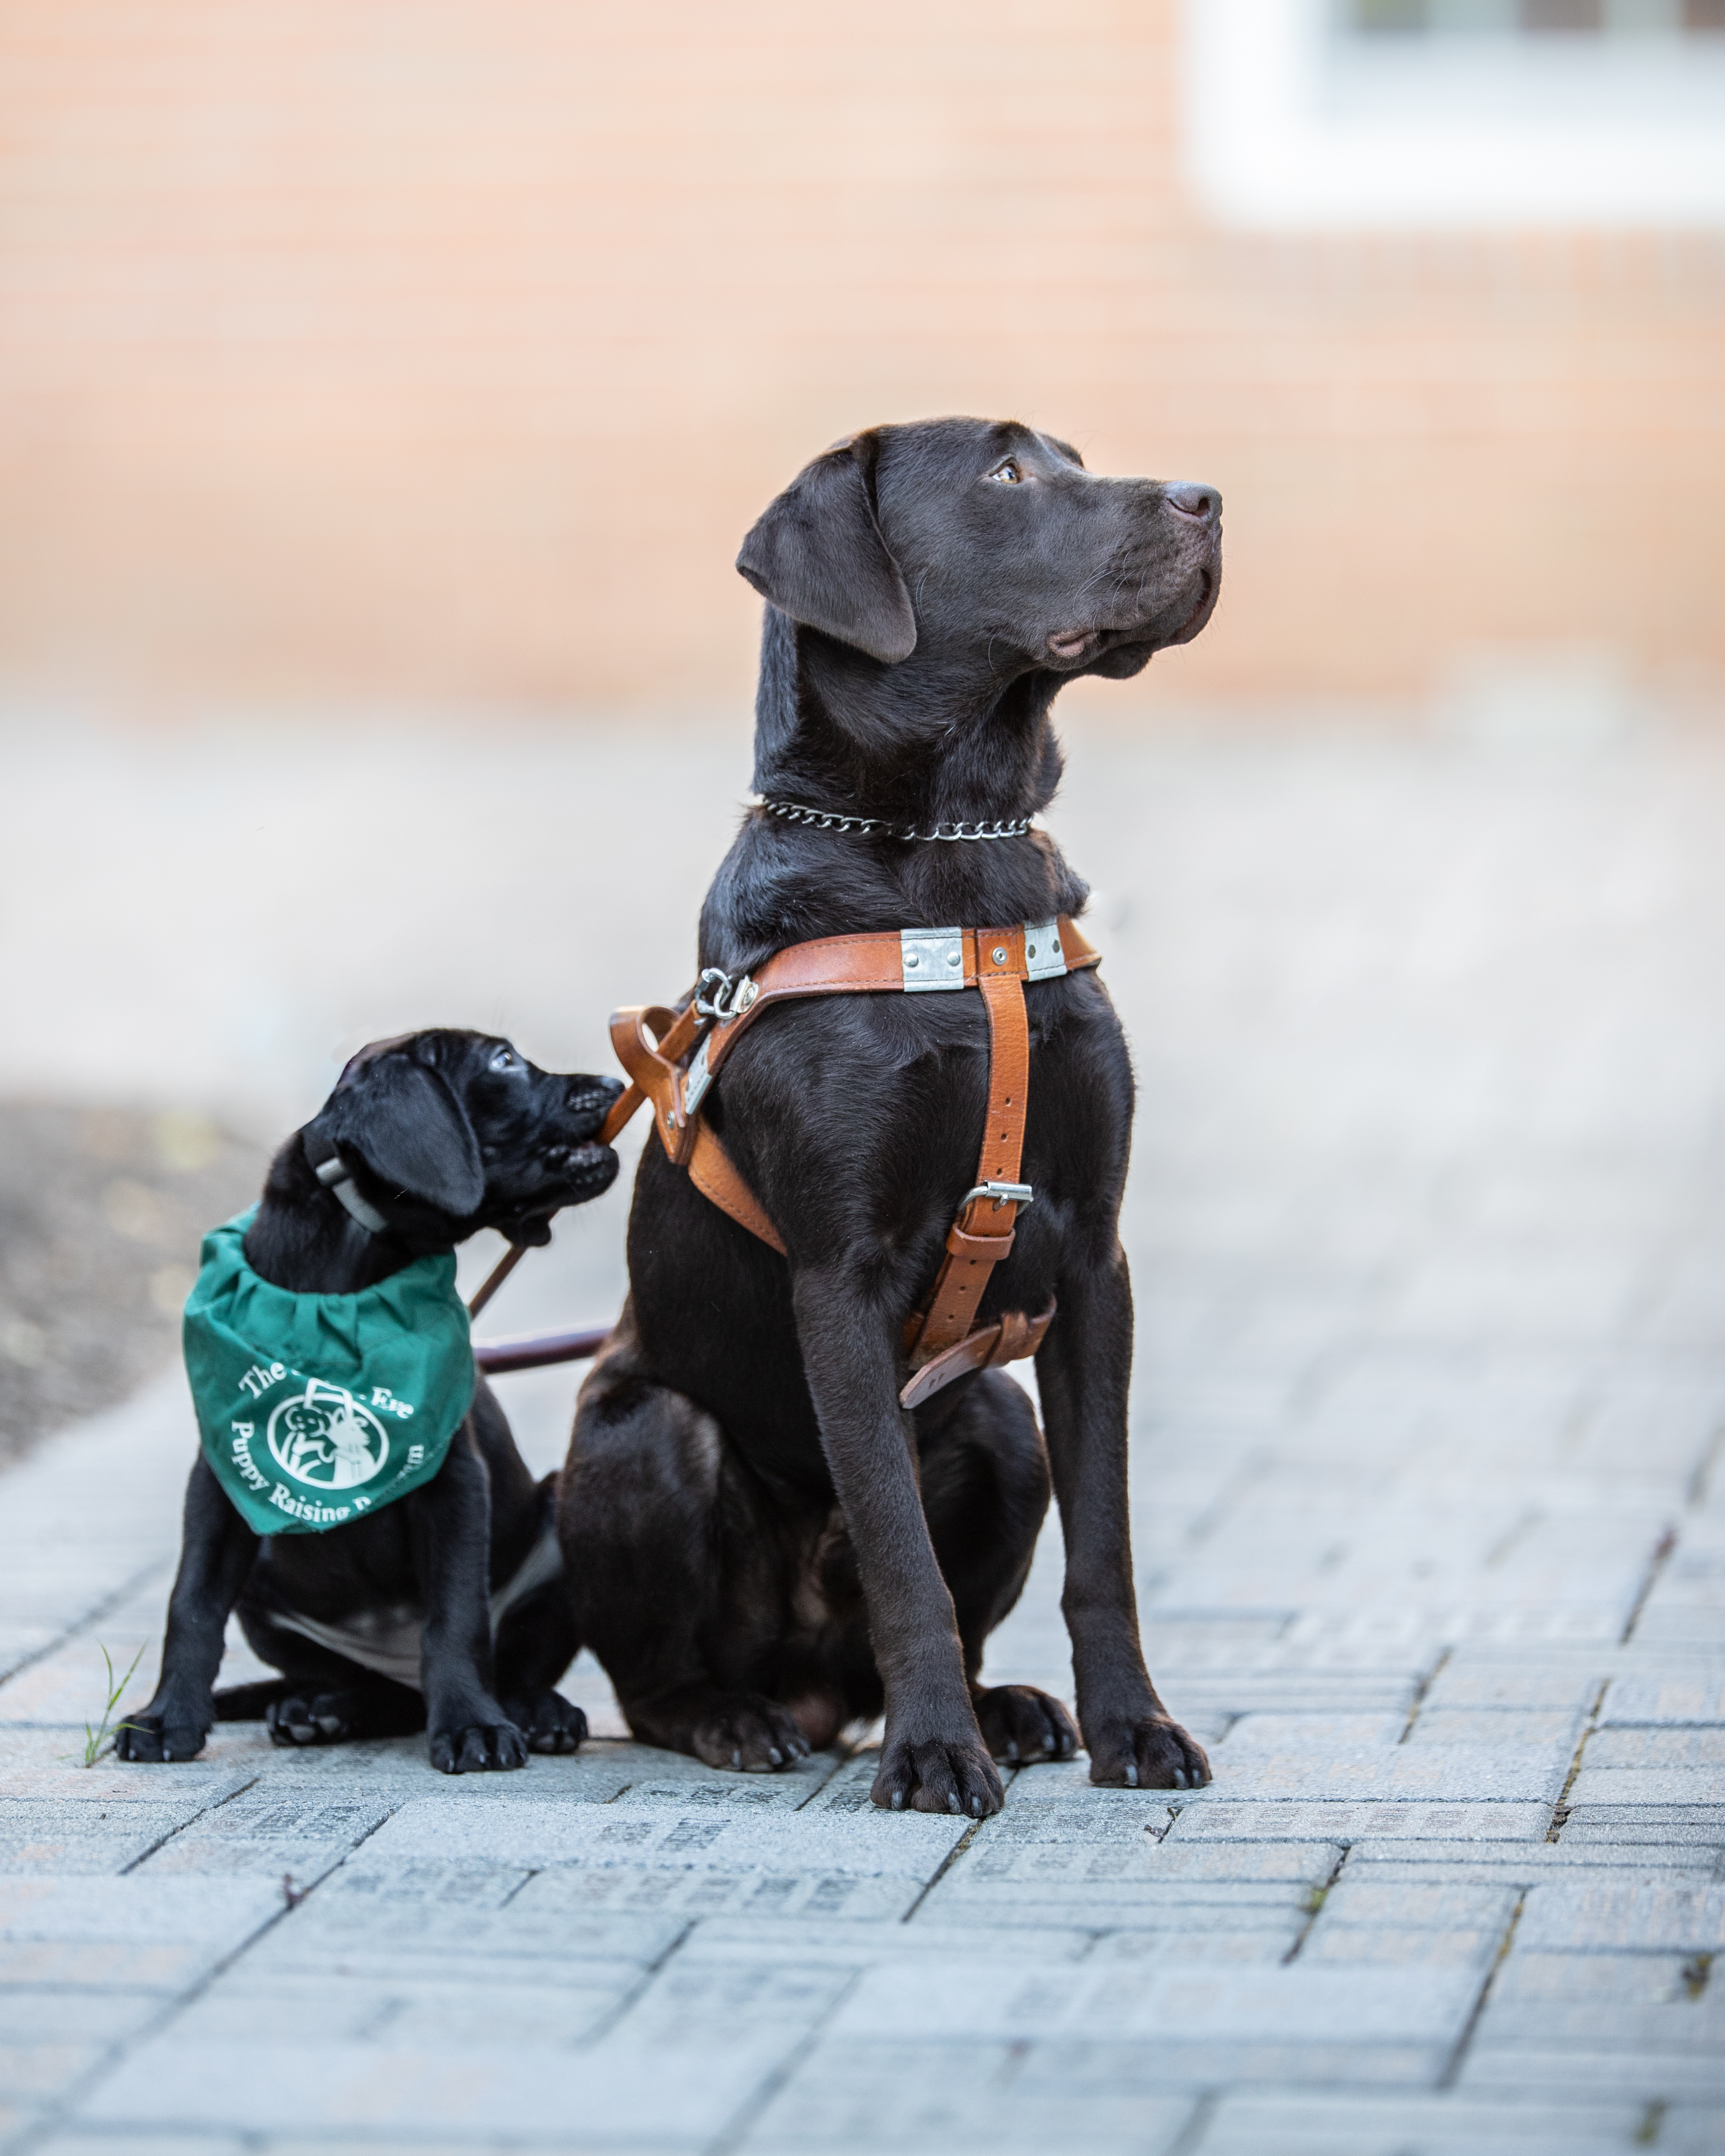 A chocolate Lab wearing a Seeing Eye harness sits looking off to the right on a brick pathway. A small black Lab puppy wearing a green Seeing Eye bandana is seated beside it, leaning back to gently bite the handle of the bigger dog’s harness.